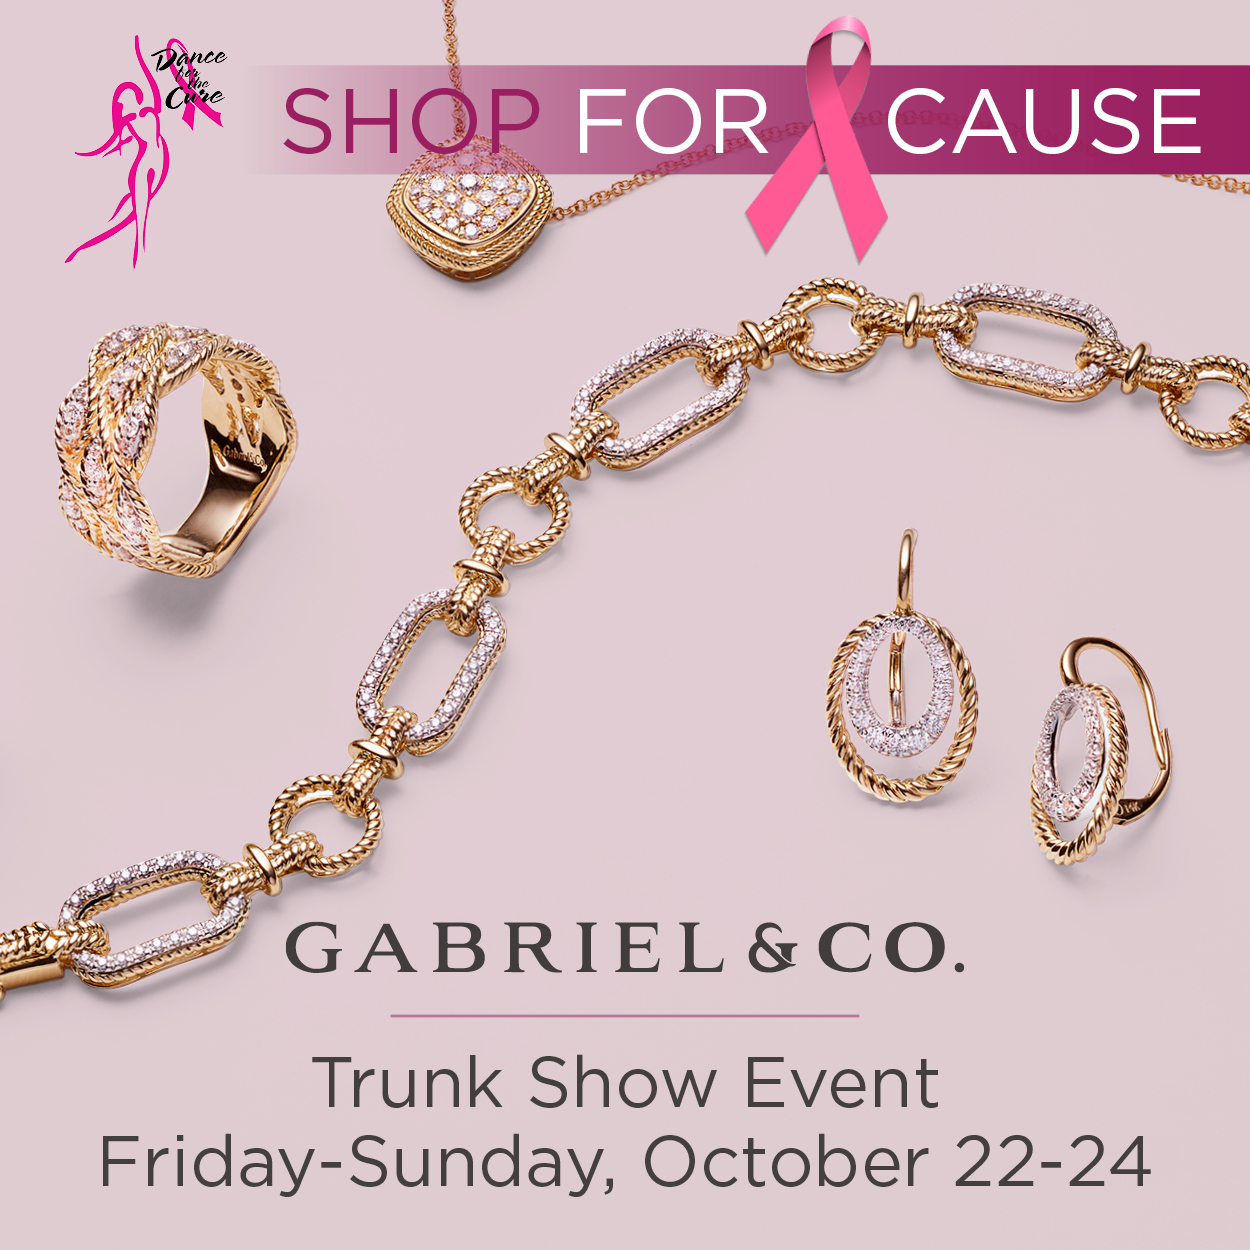 Shop for A Cause